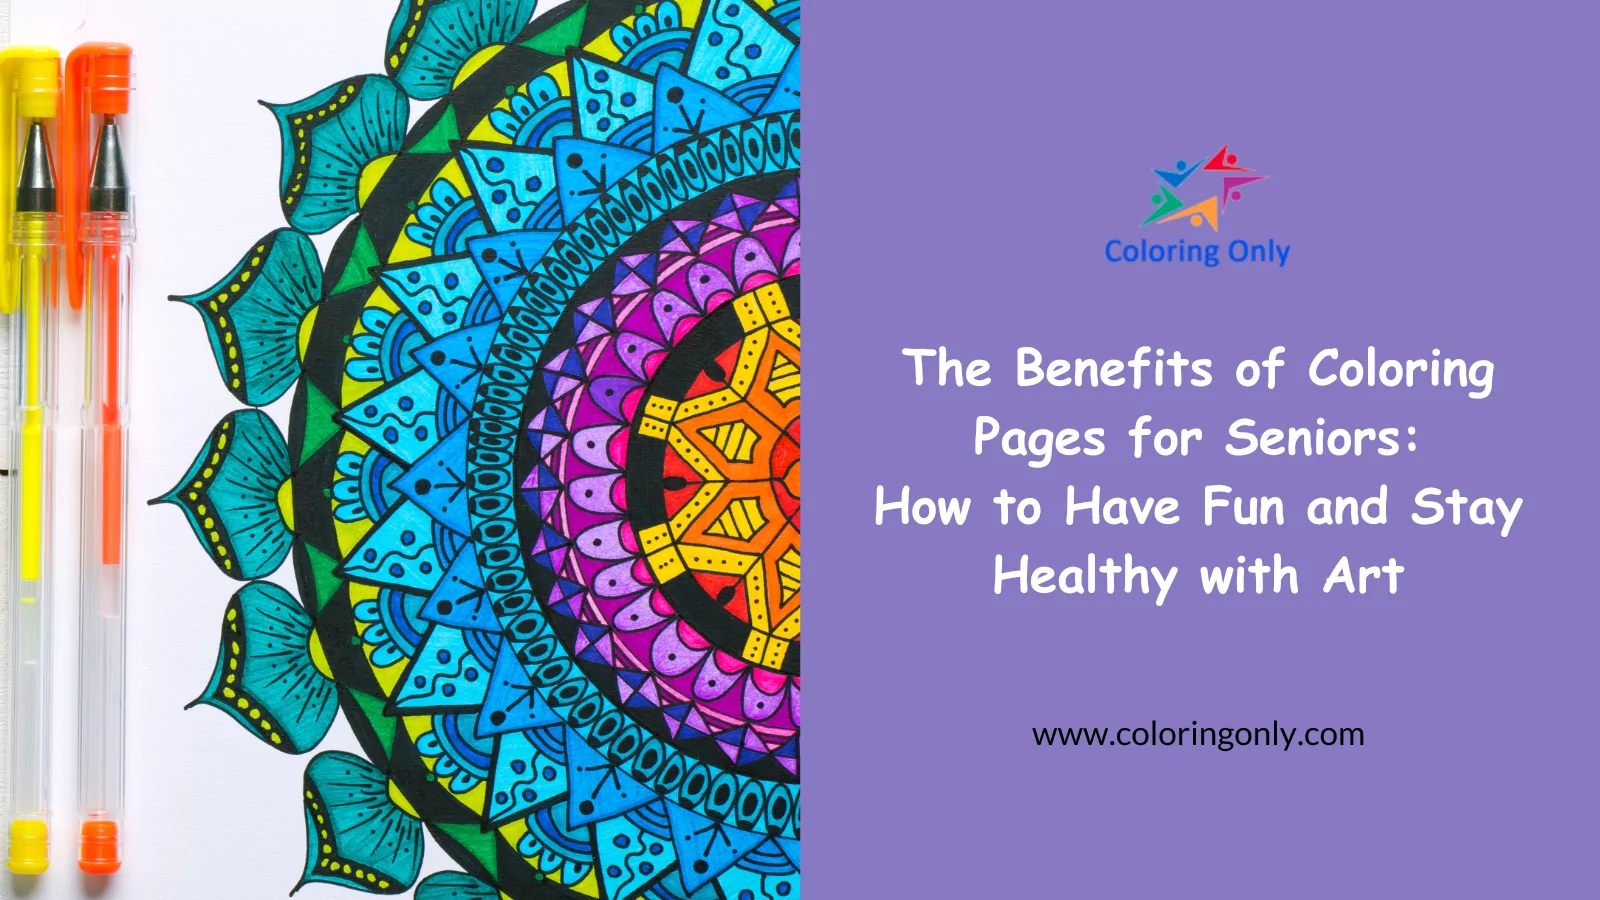 The Benefits of Coloring Pages for Seniors: How to Have Fun and Stay Healthy with Art